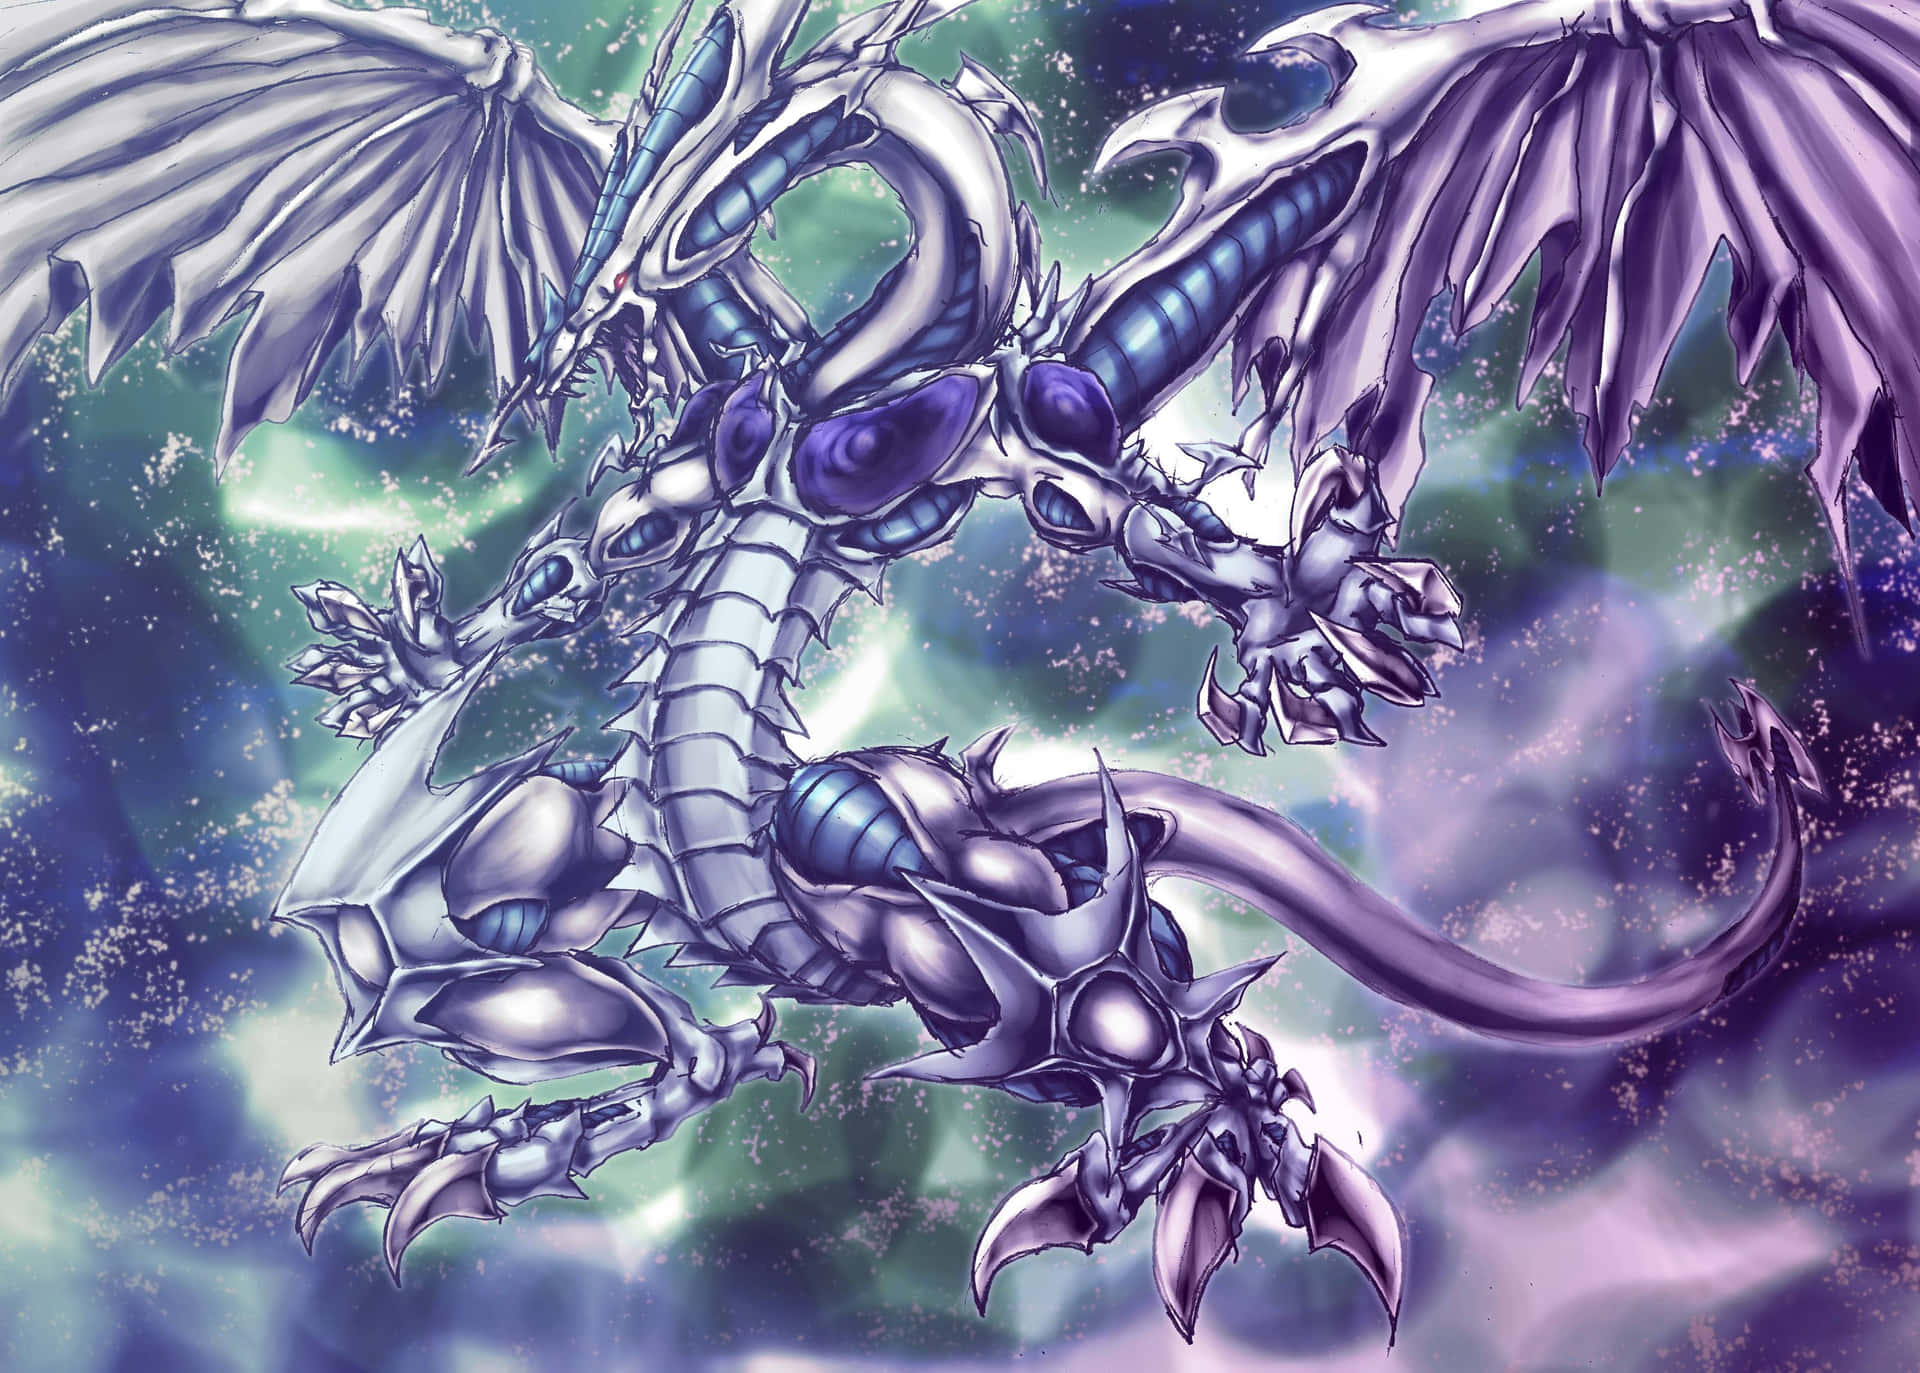 Fierce and powerful Yugioh Dragons in action Wallpaper